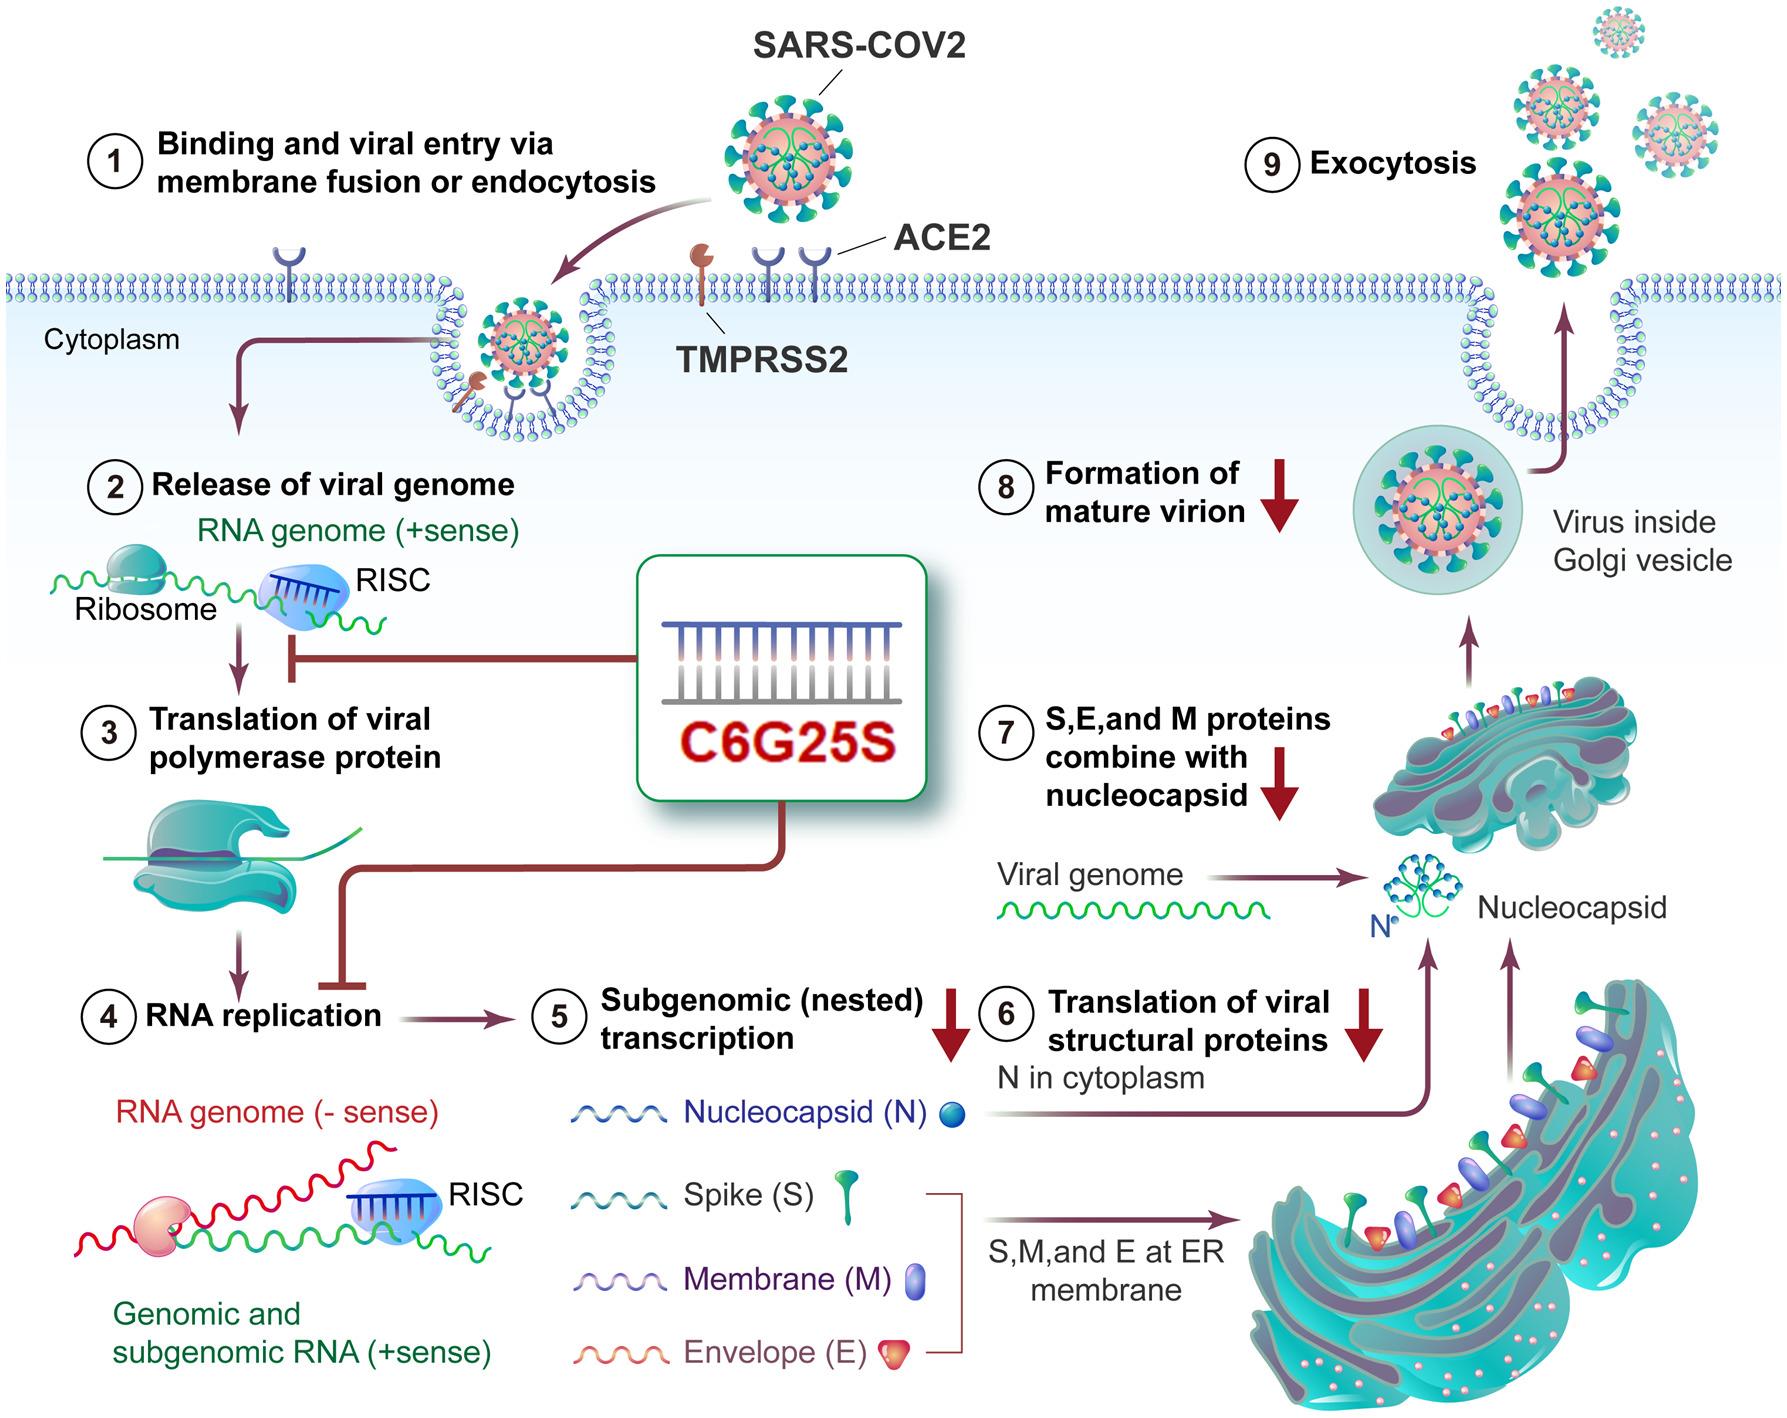 Success in Isolating First SARS-CoV-2 Virus Paved the Way for Vaccine Development in Taiwan